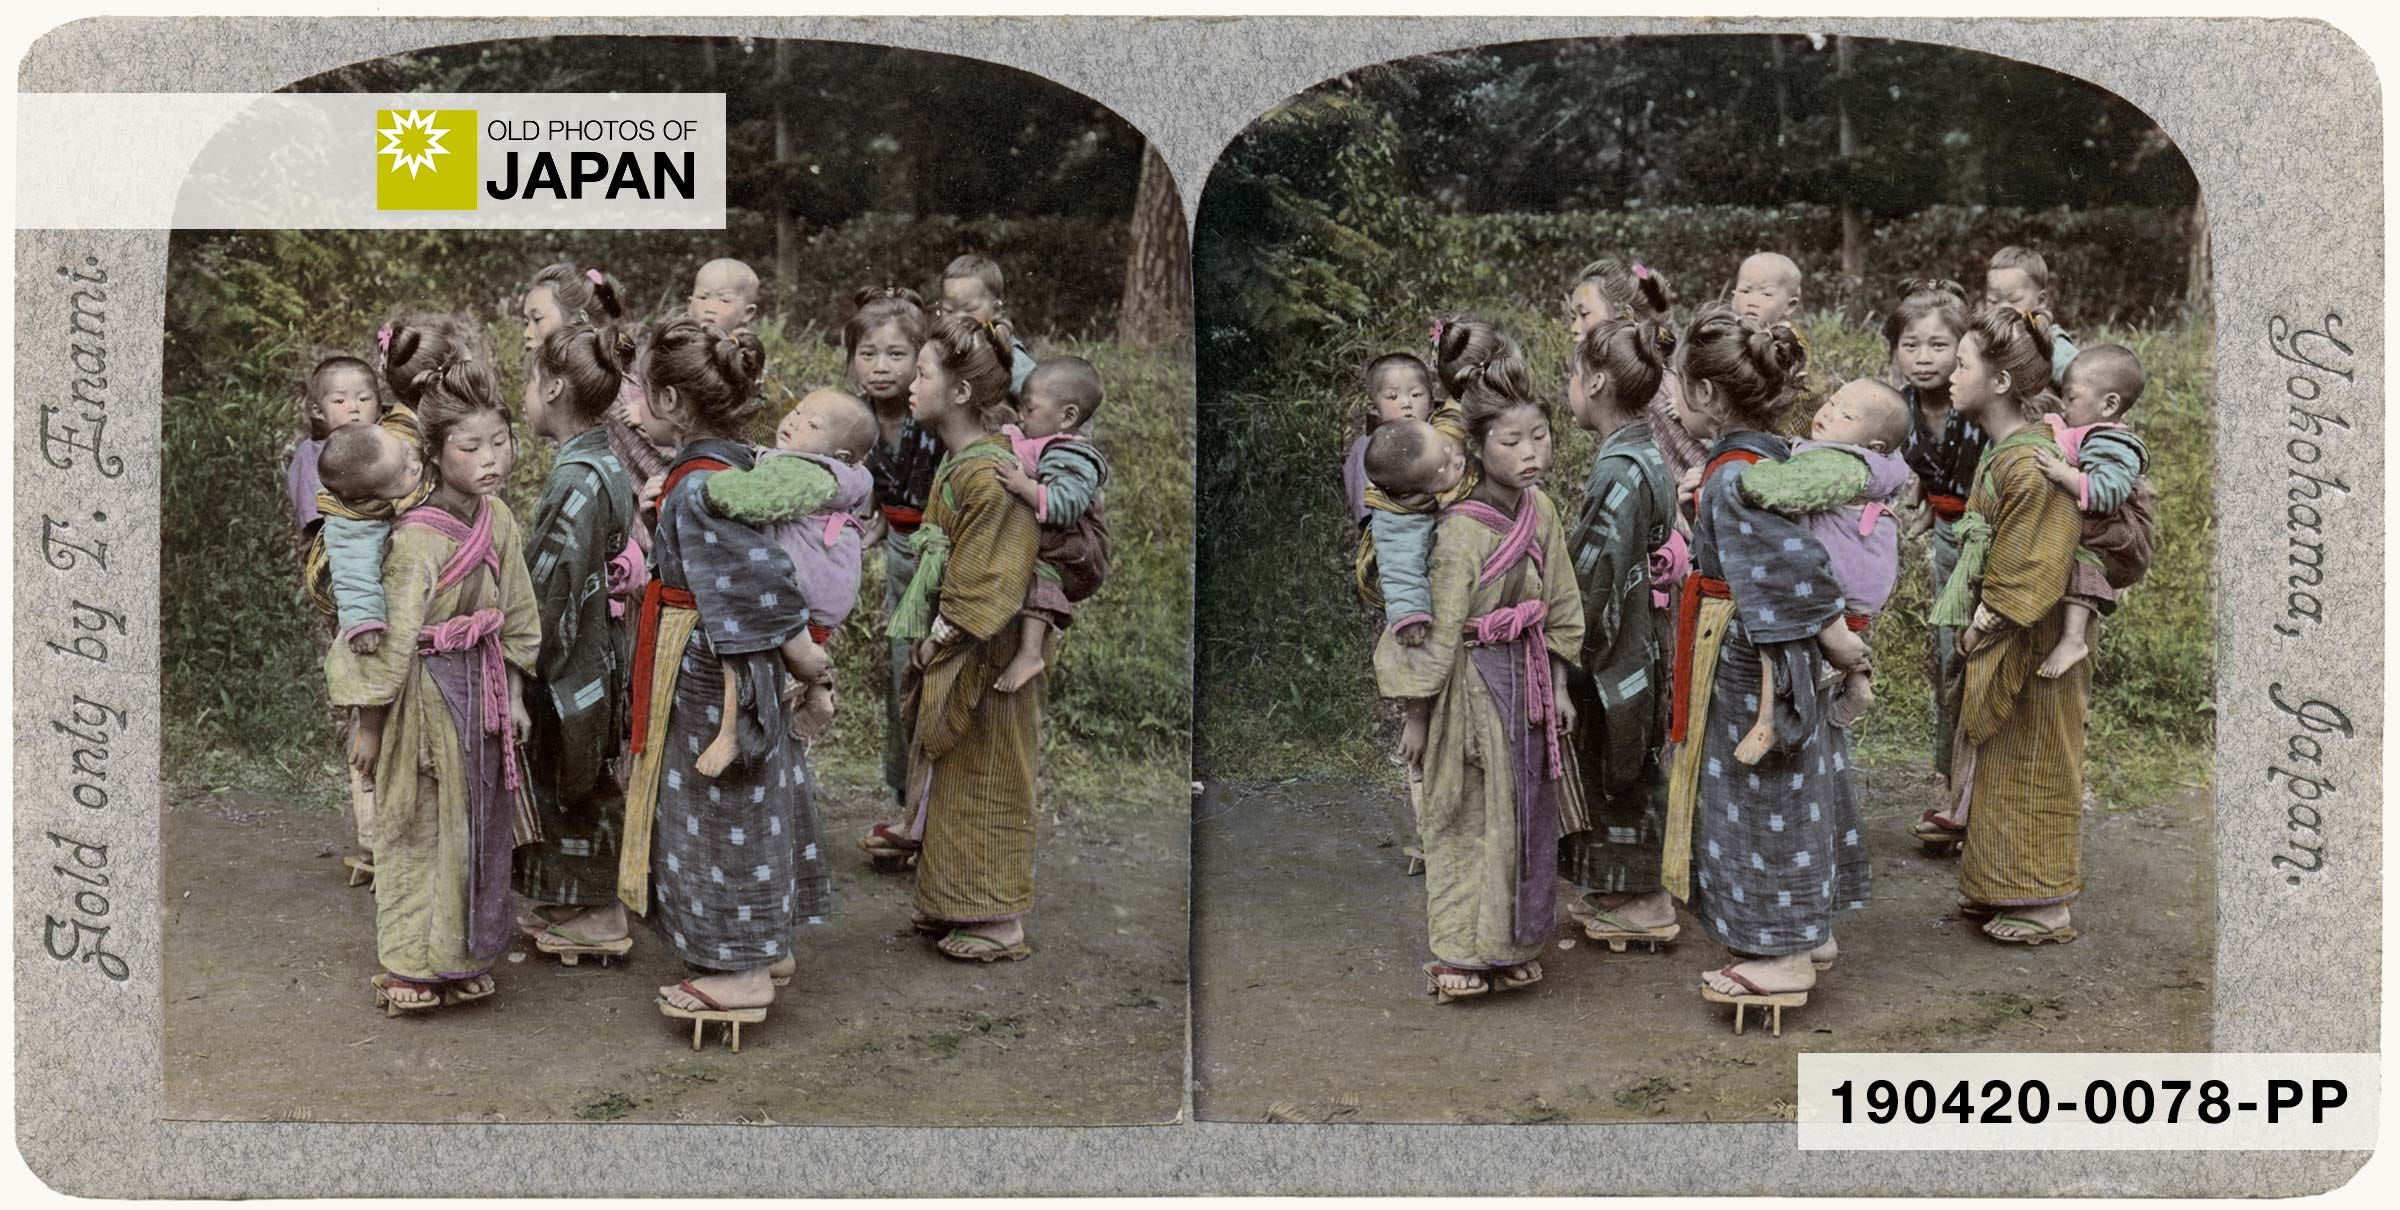 Hand colored stereoview by Enami, ca. 1900s